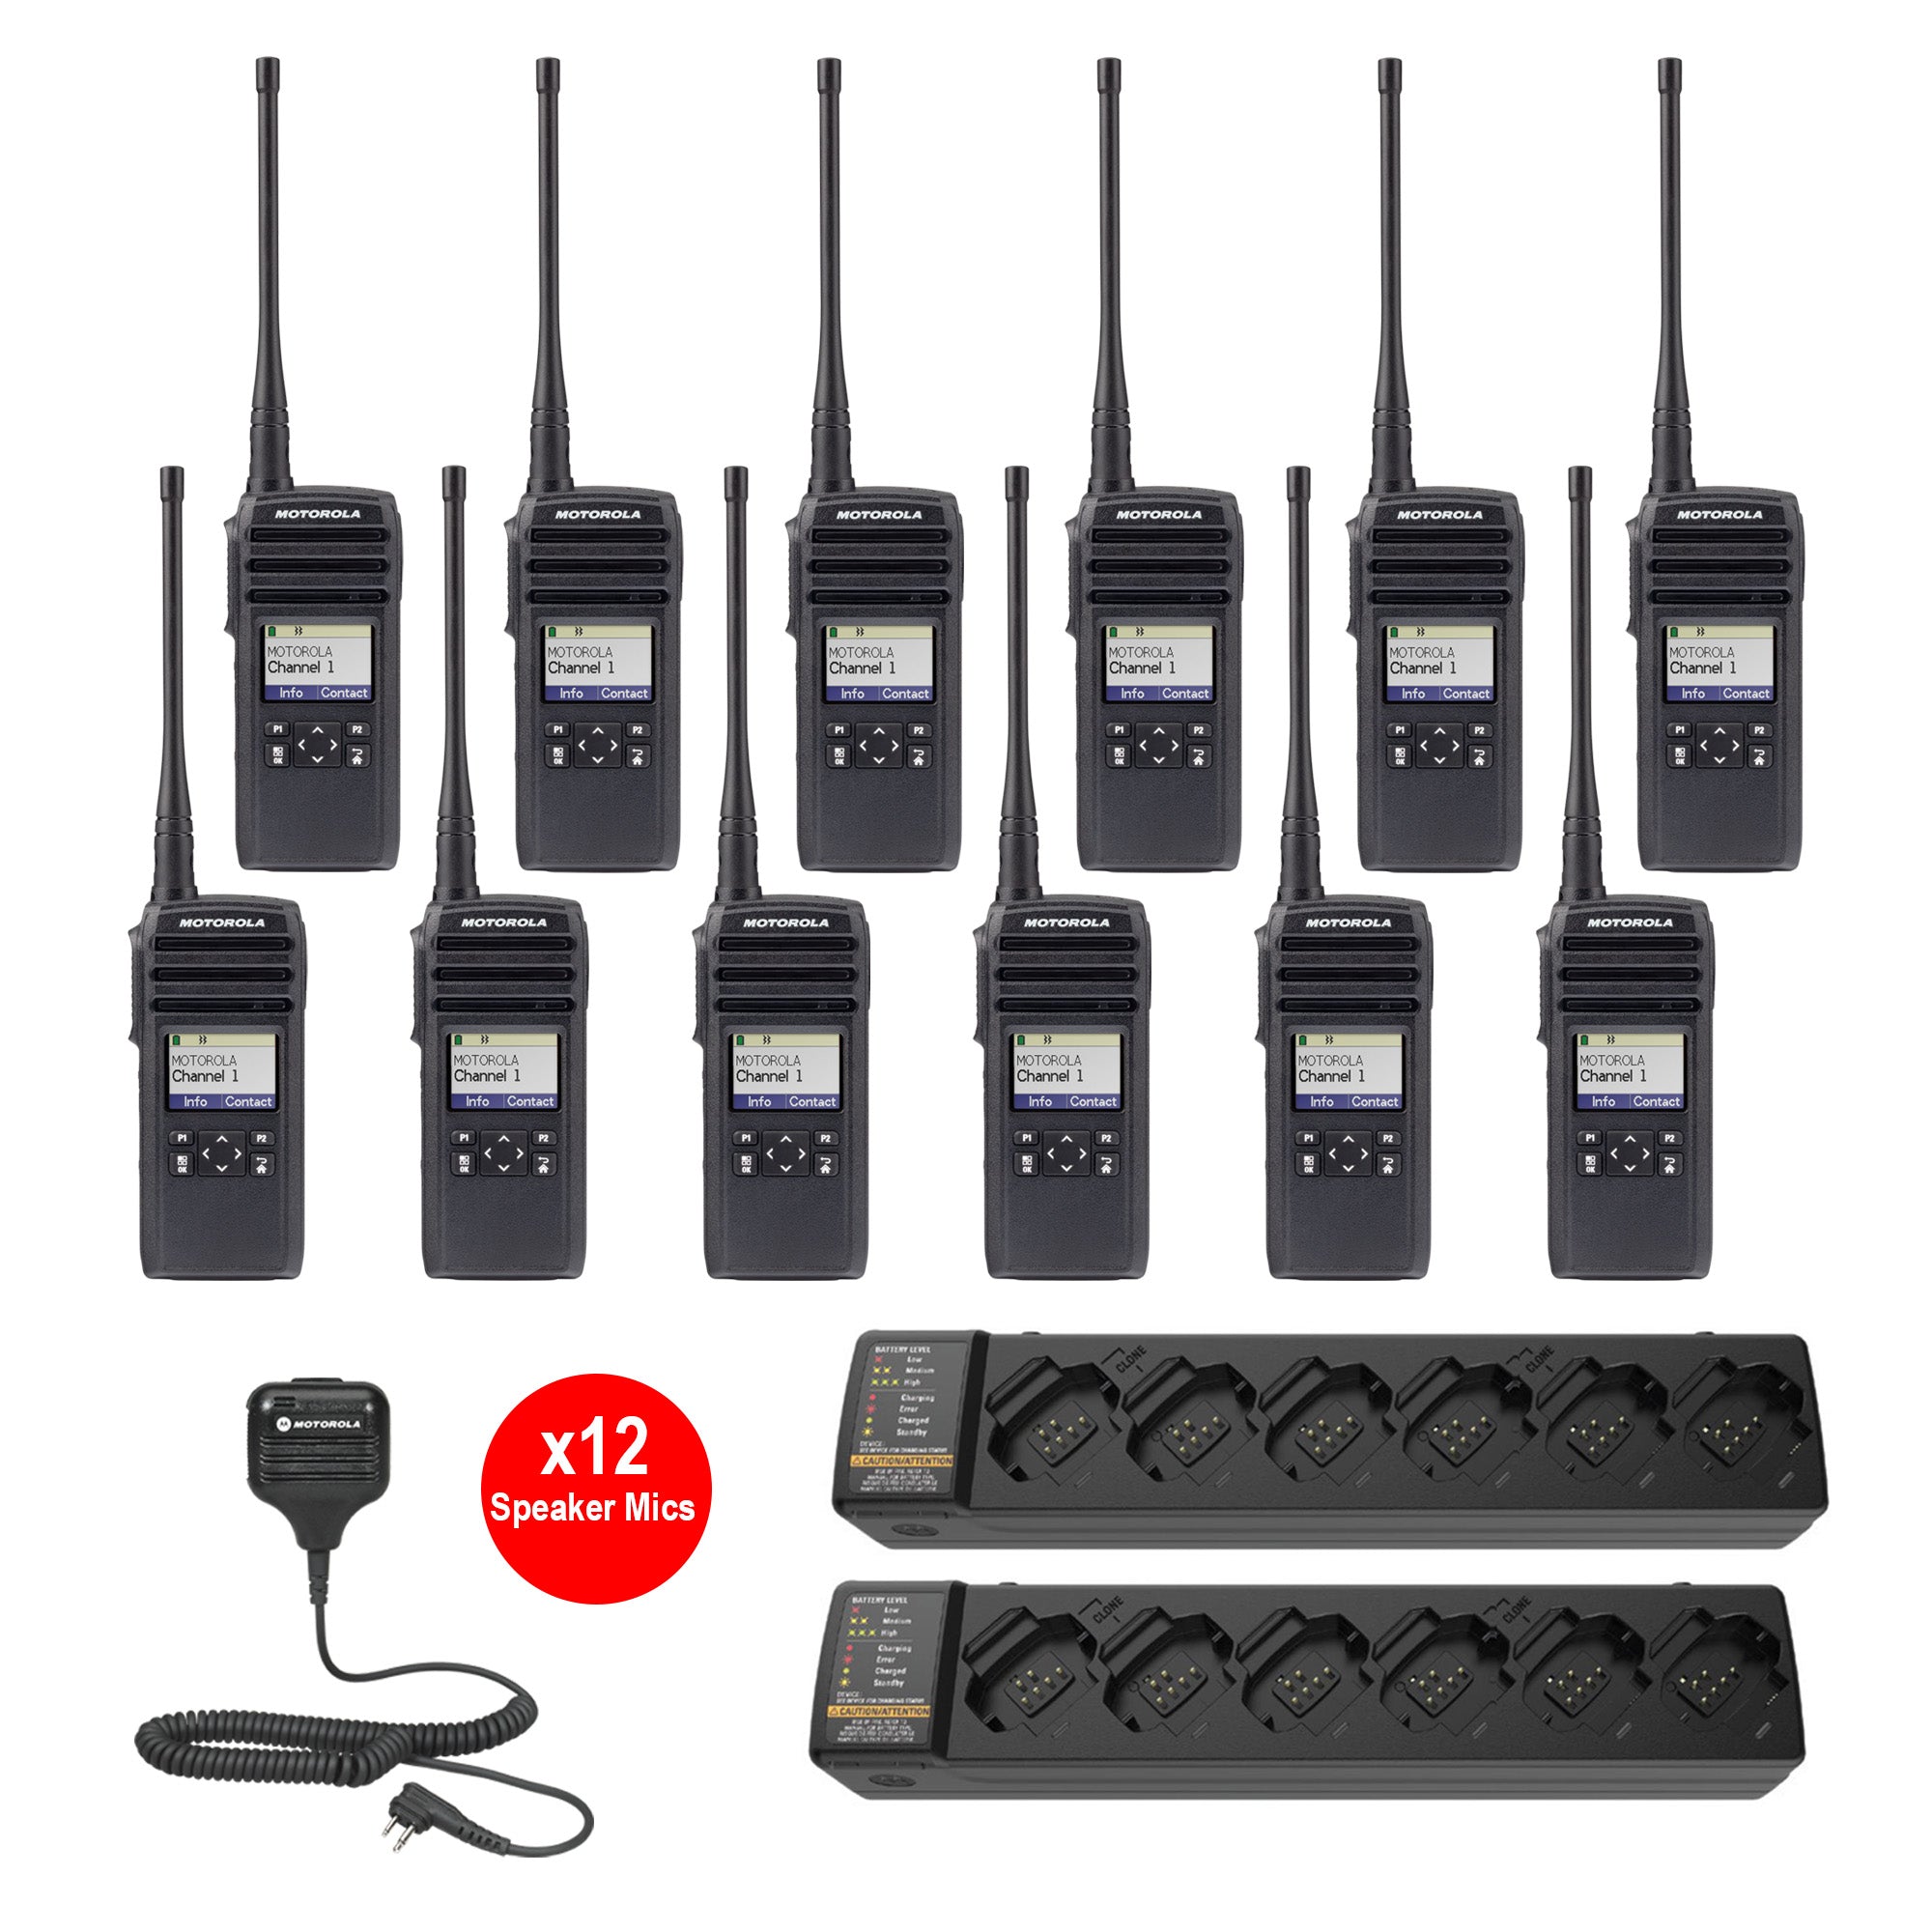 DTR600 12 Pack with Multi Unit Charger and Speaker Microphones